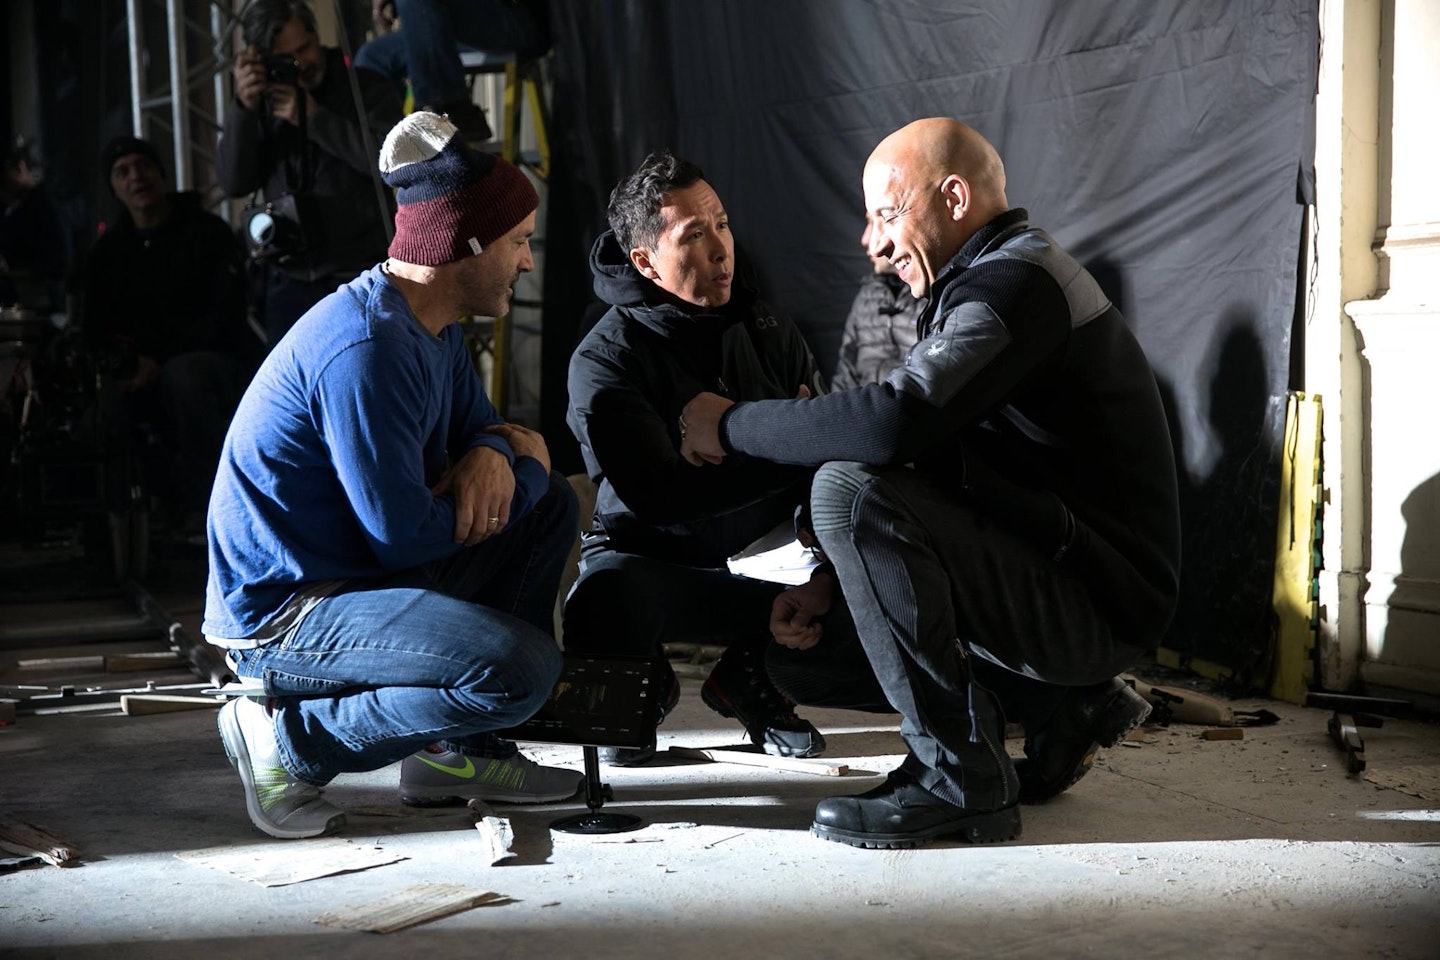 Donnie Yen on the set of xXx: The Return Of Xander Cage